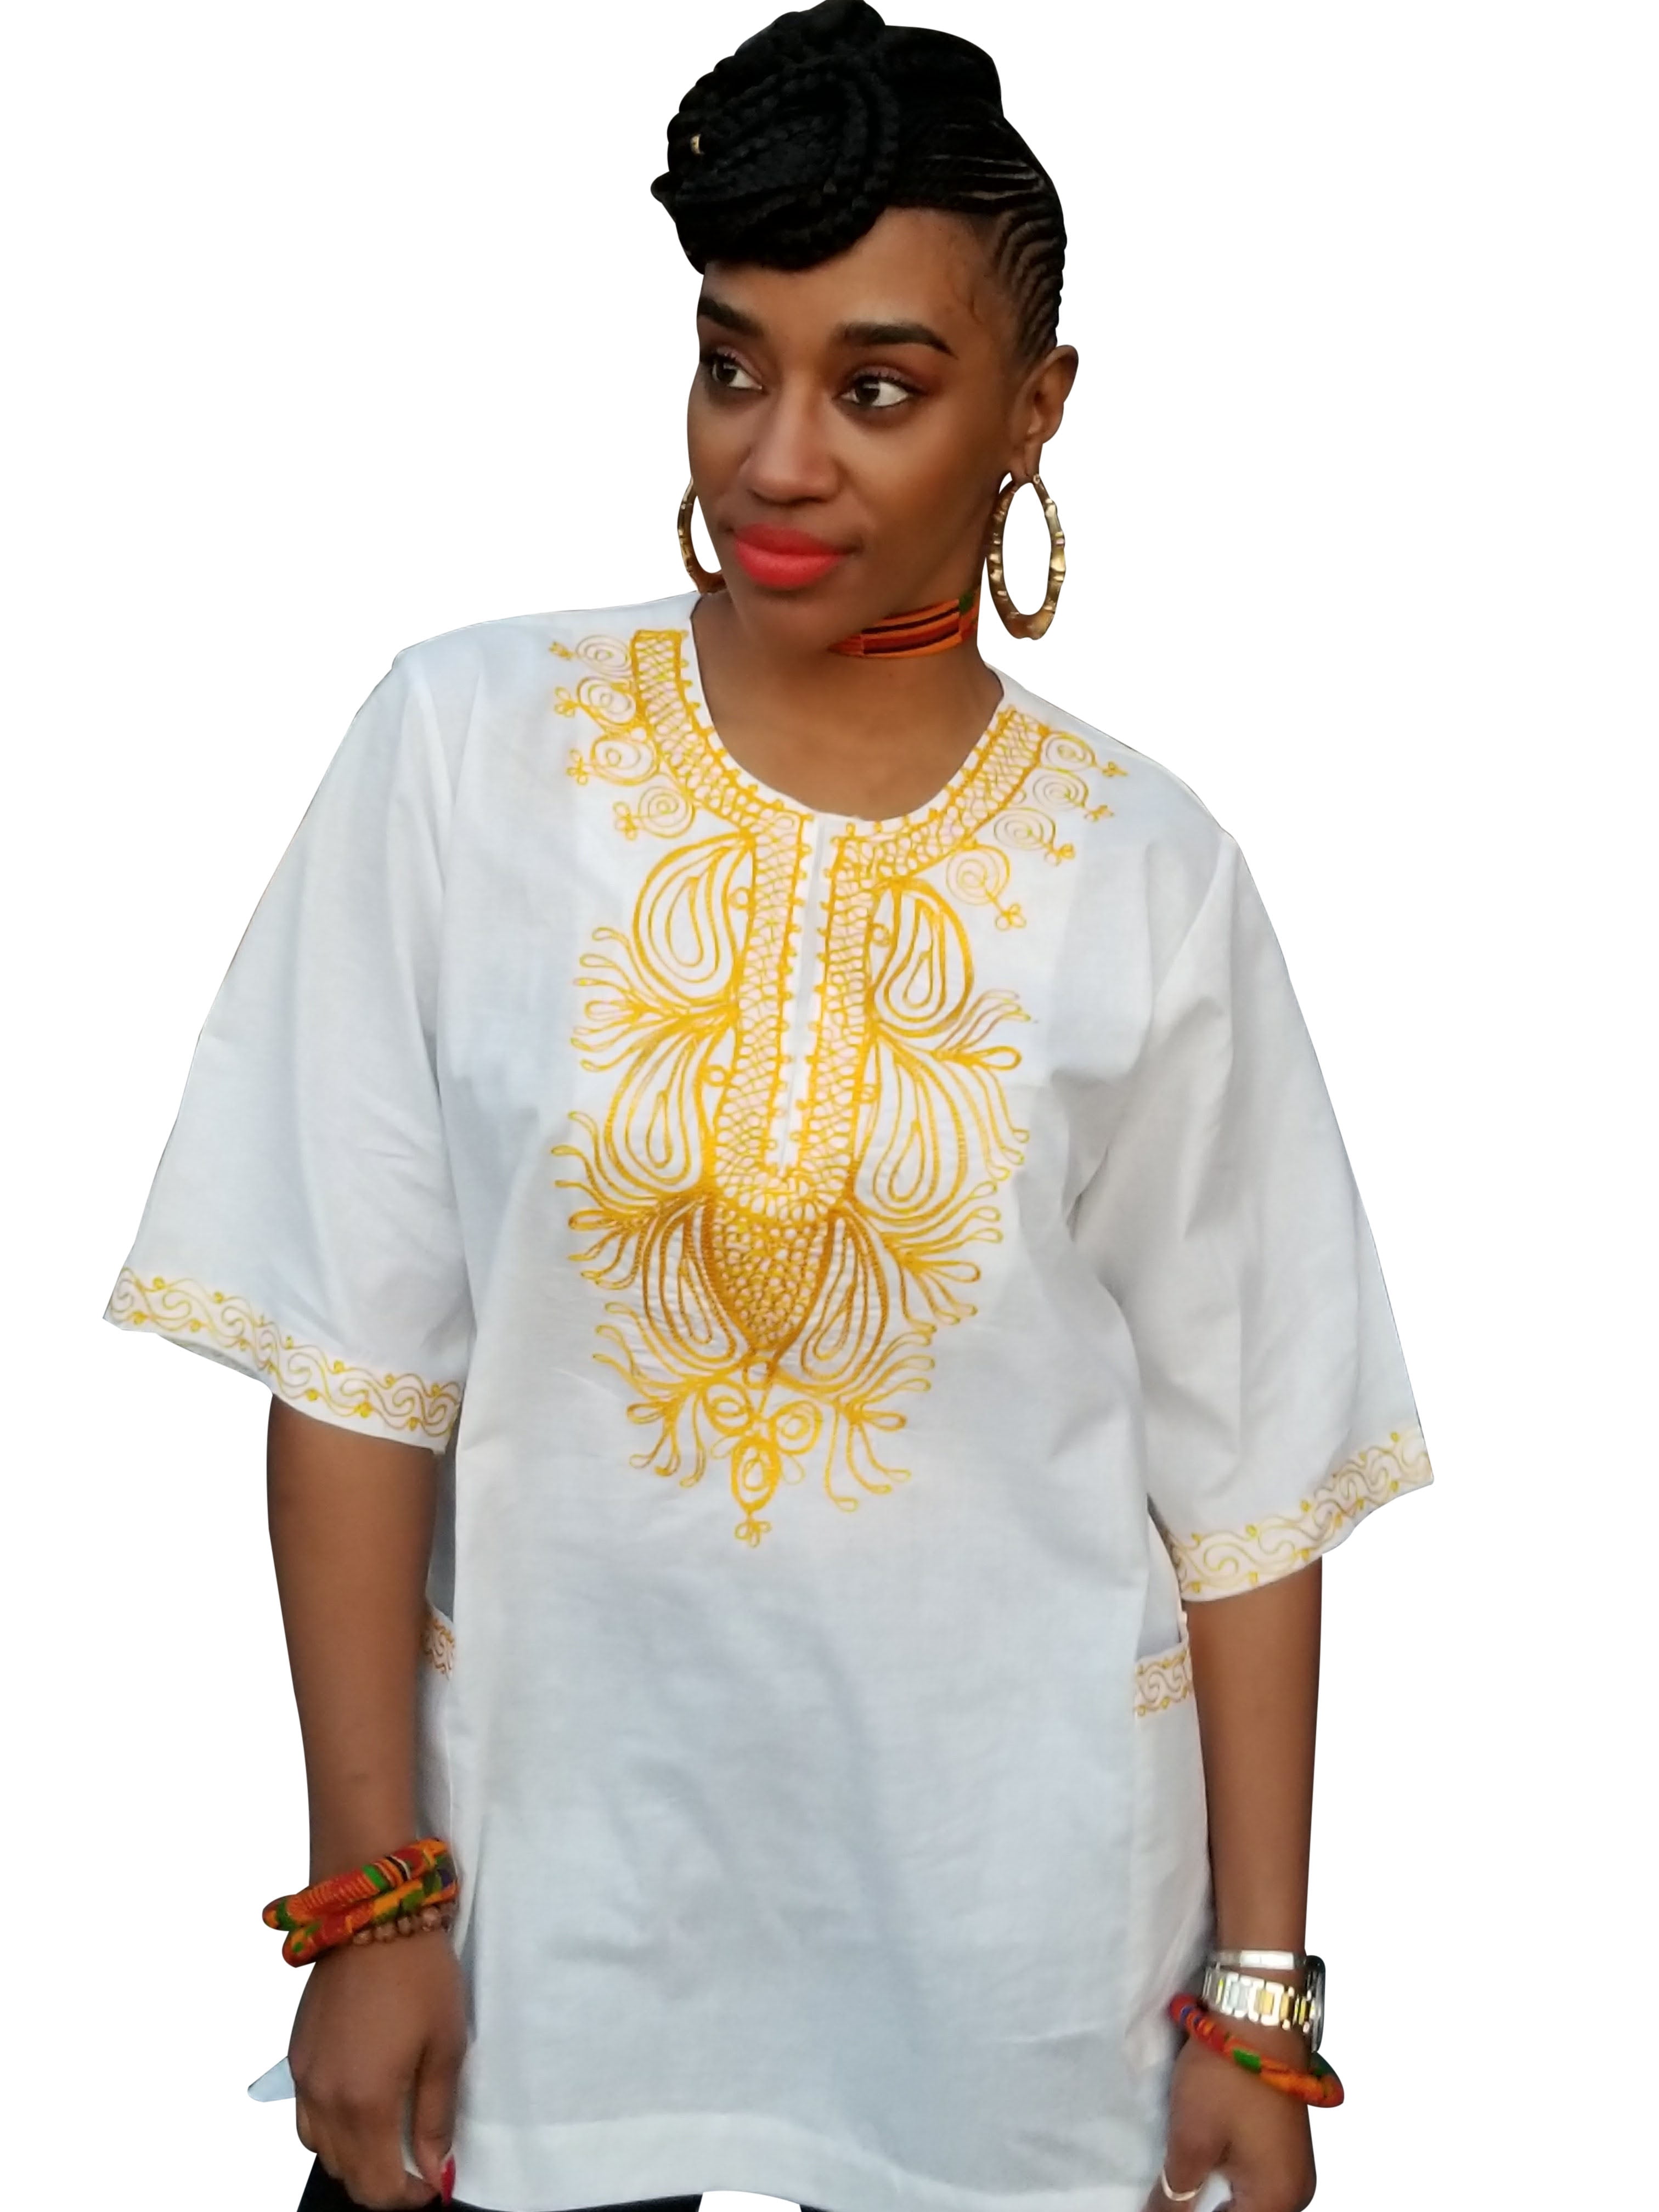 Off-White African Dashiki Shirt with Golden Orange Embroidery 